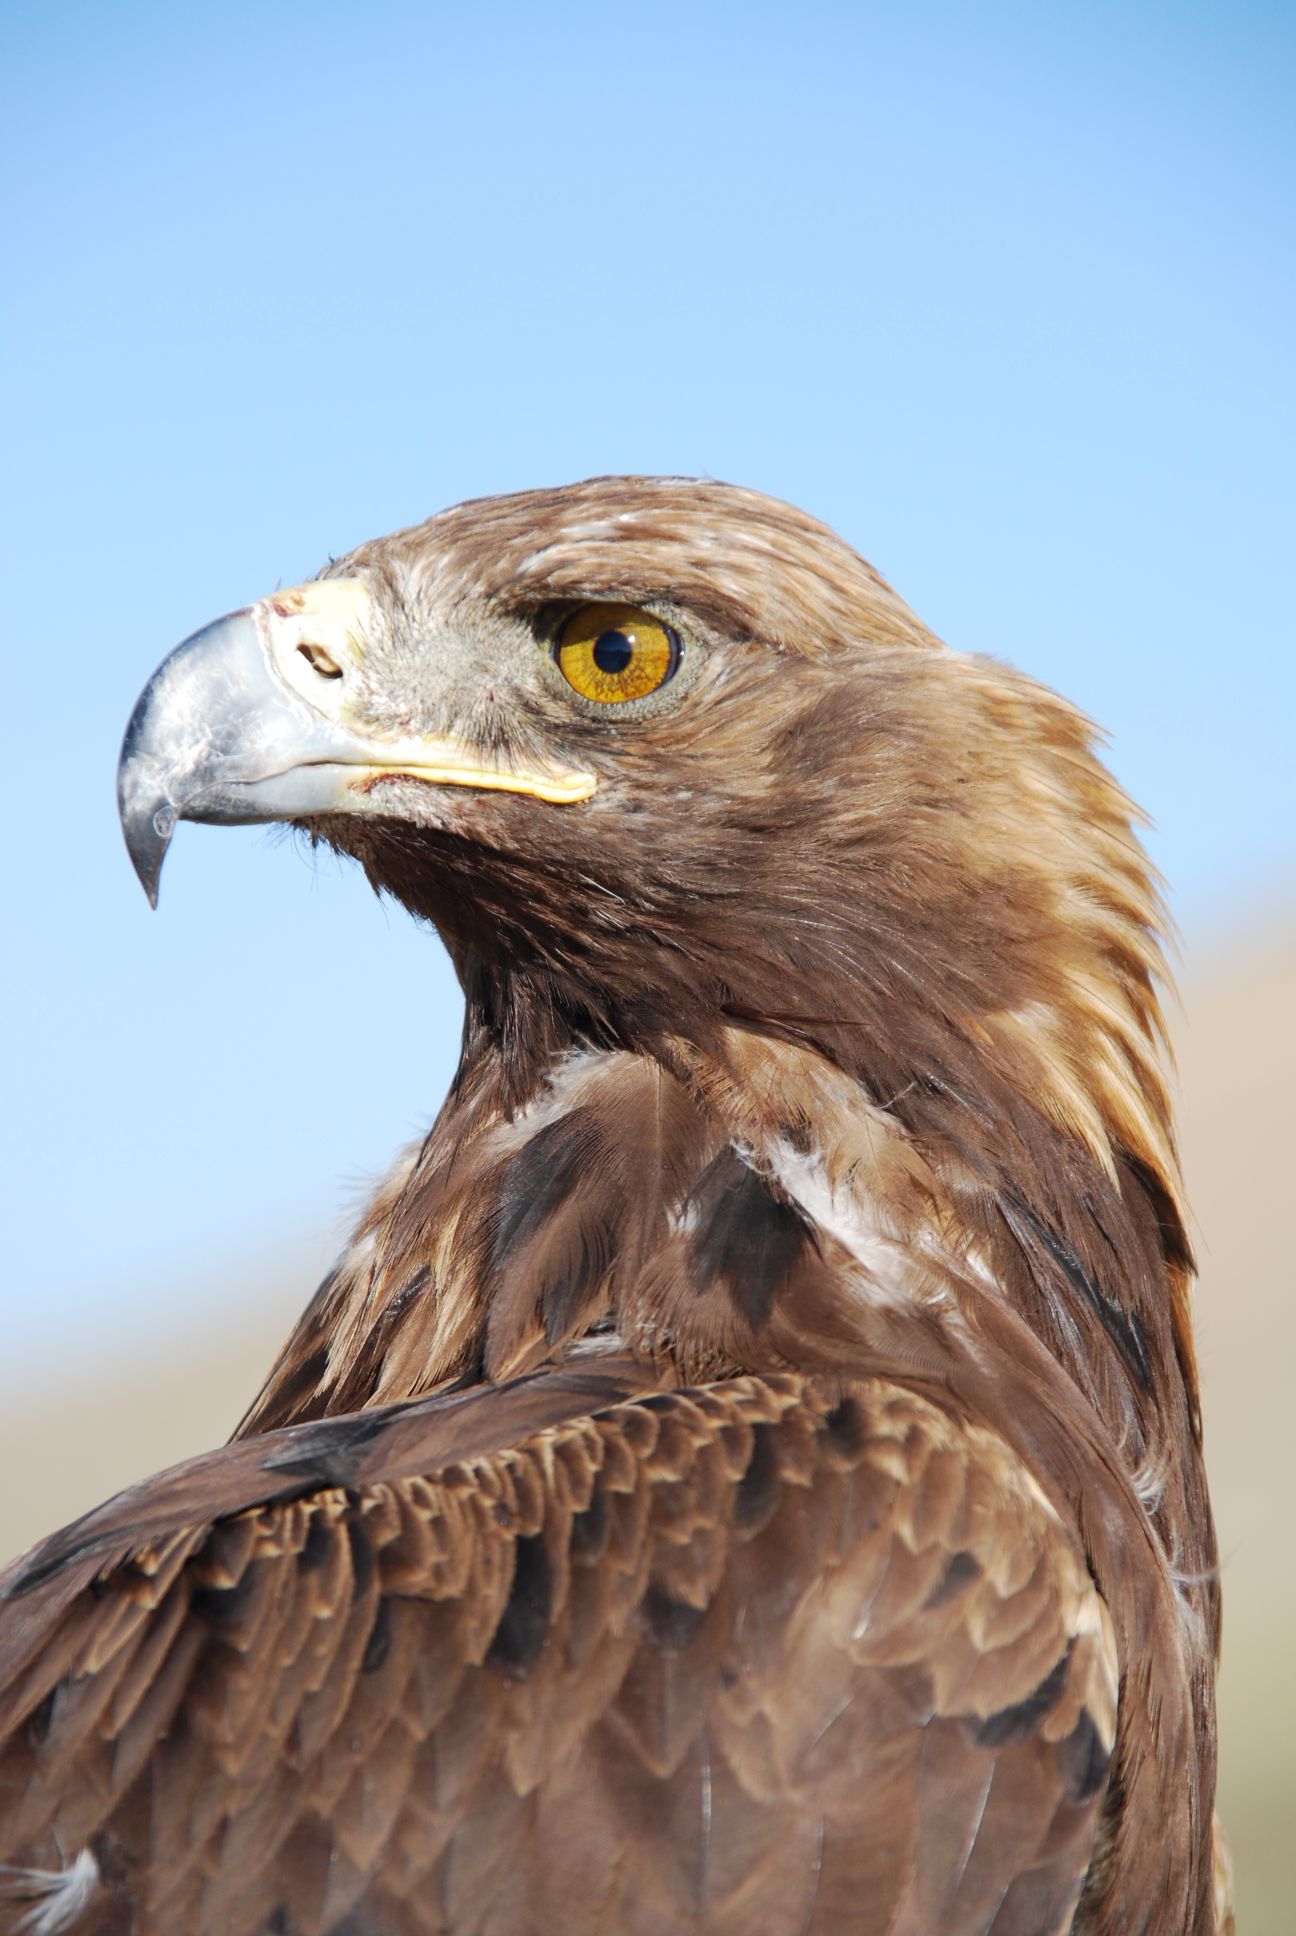 golden eagle - absolutely stunning